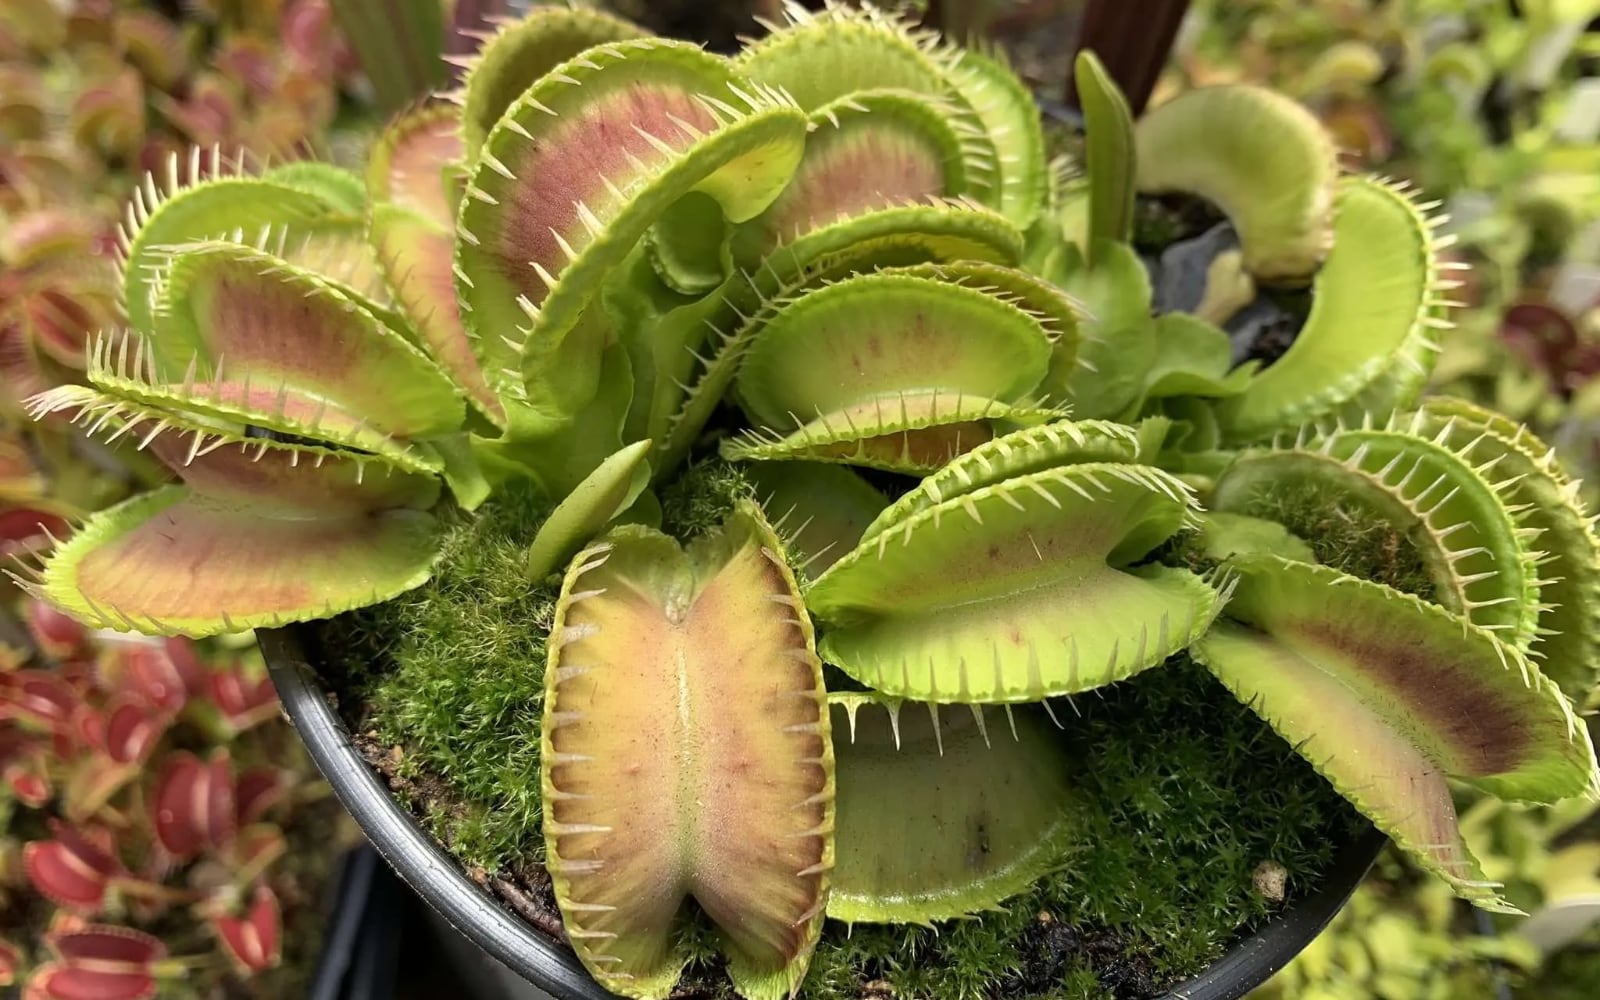 There is only one species of Venus flytrap, but many different forms, known as cultivars. Some of these can get really large - but which is the biggest?